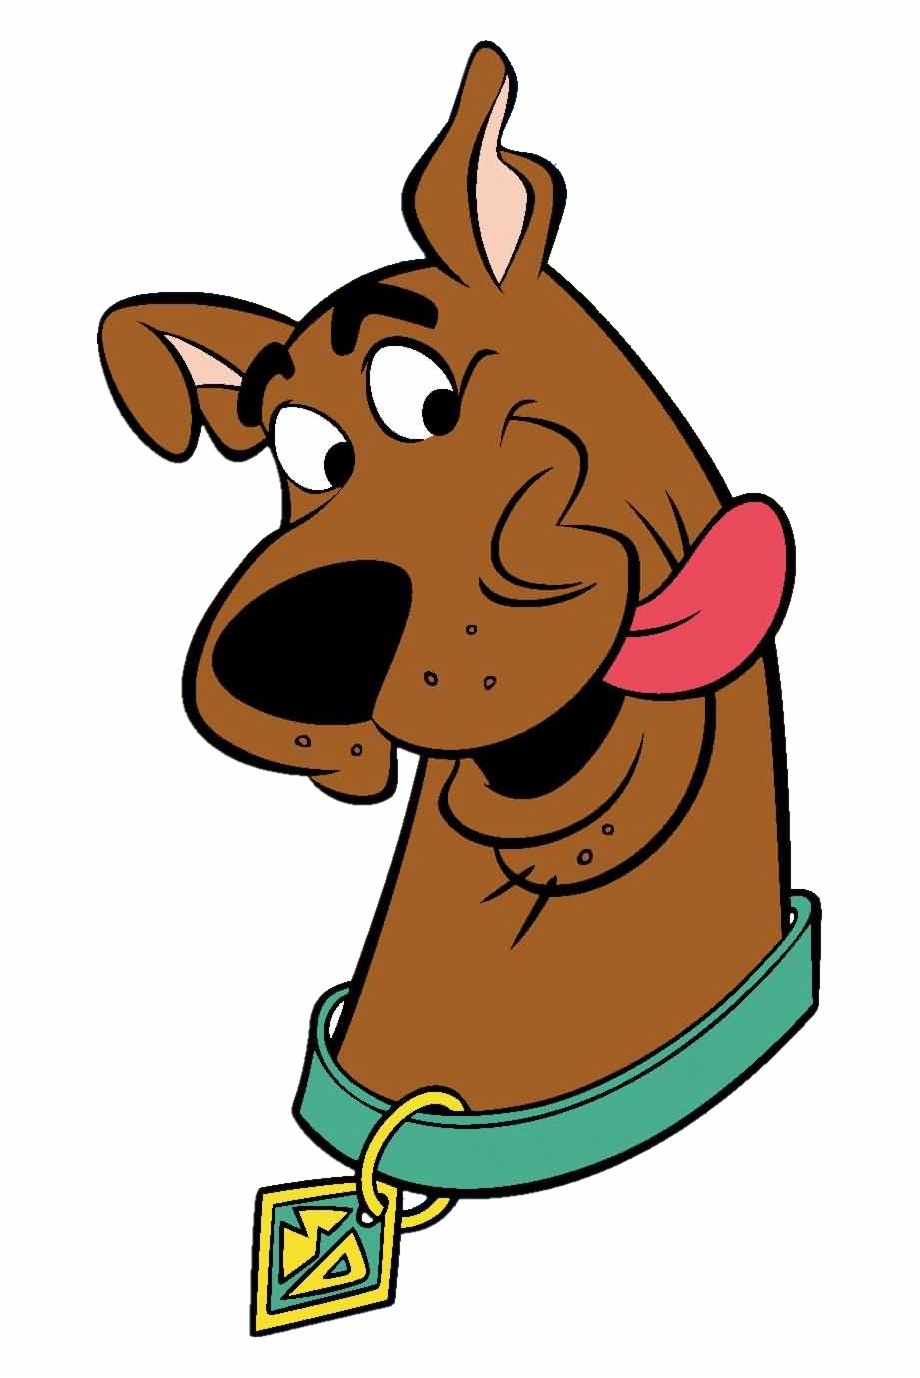 Scooby Doo Face Png Transparent Scooby Doo Face